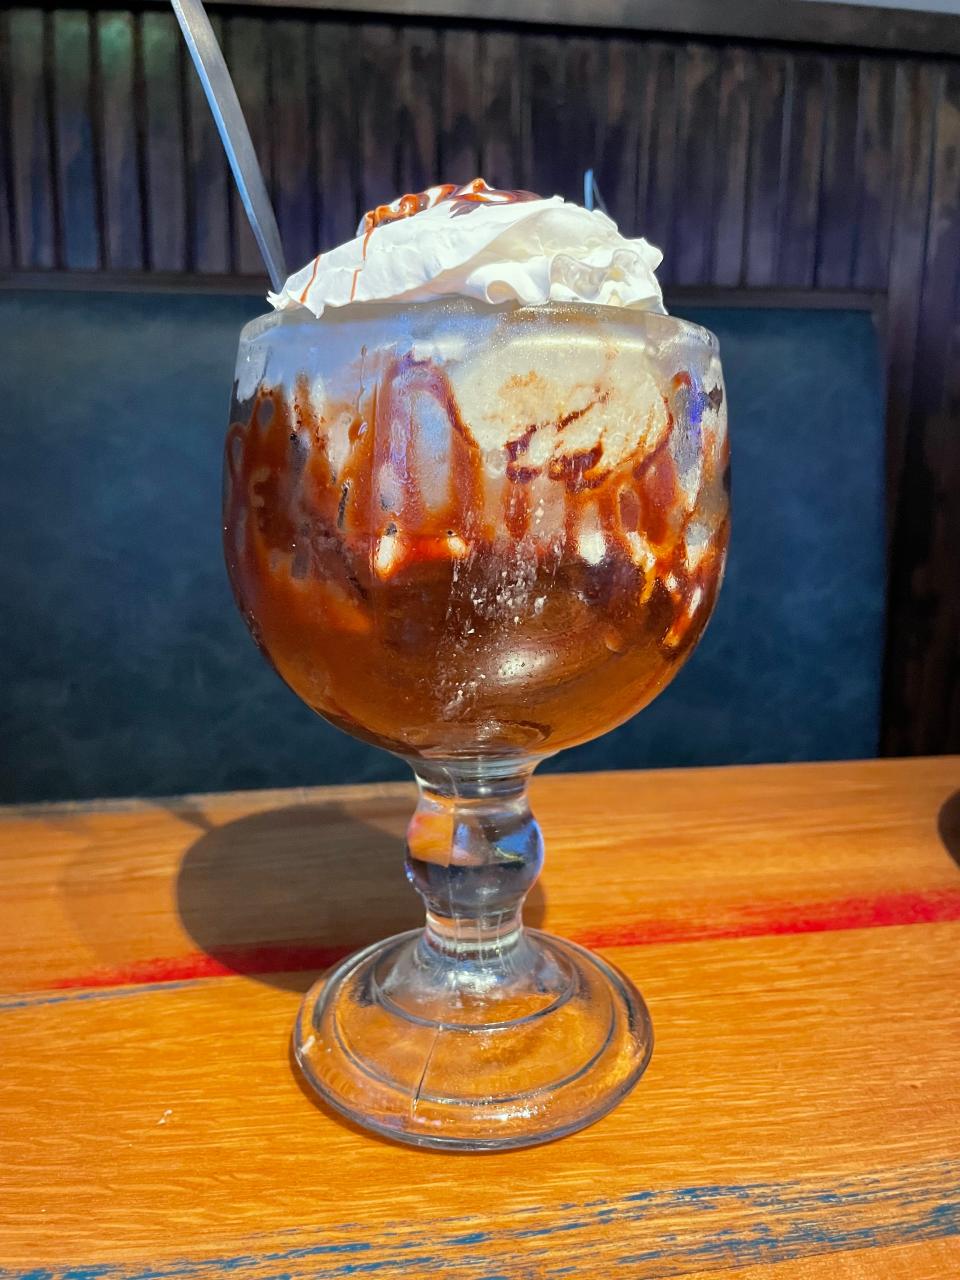 The Brownie Bottom Overload is a fudge brownie served warm and topped with vanilla ice cream and hot fudge served at Blue Moose Burgers & Wings in Alcoa.